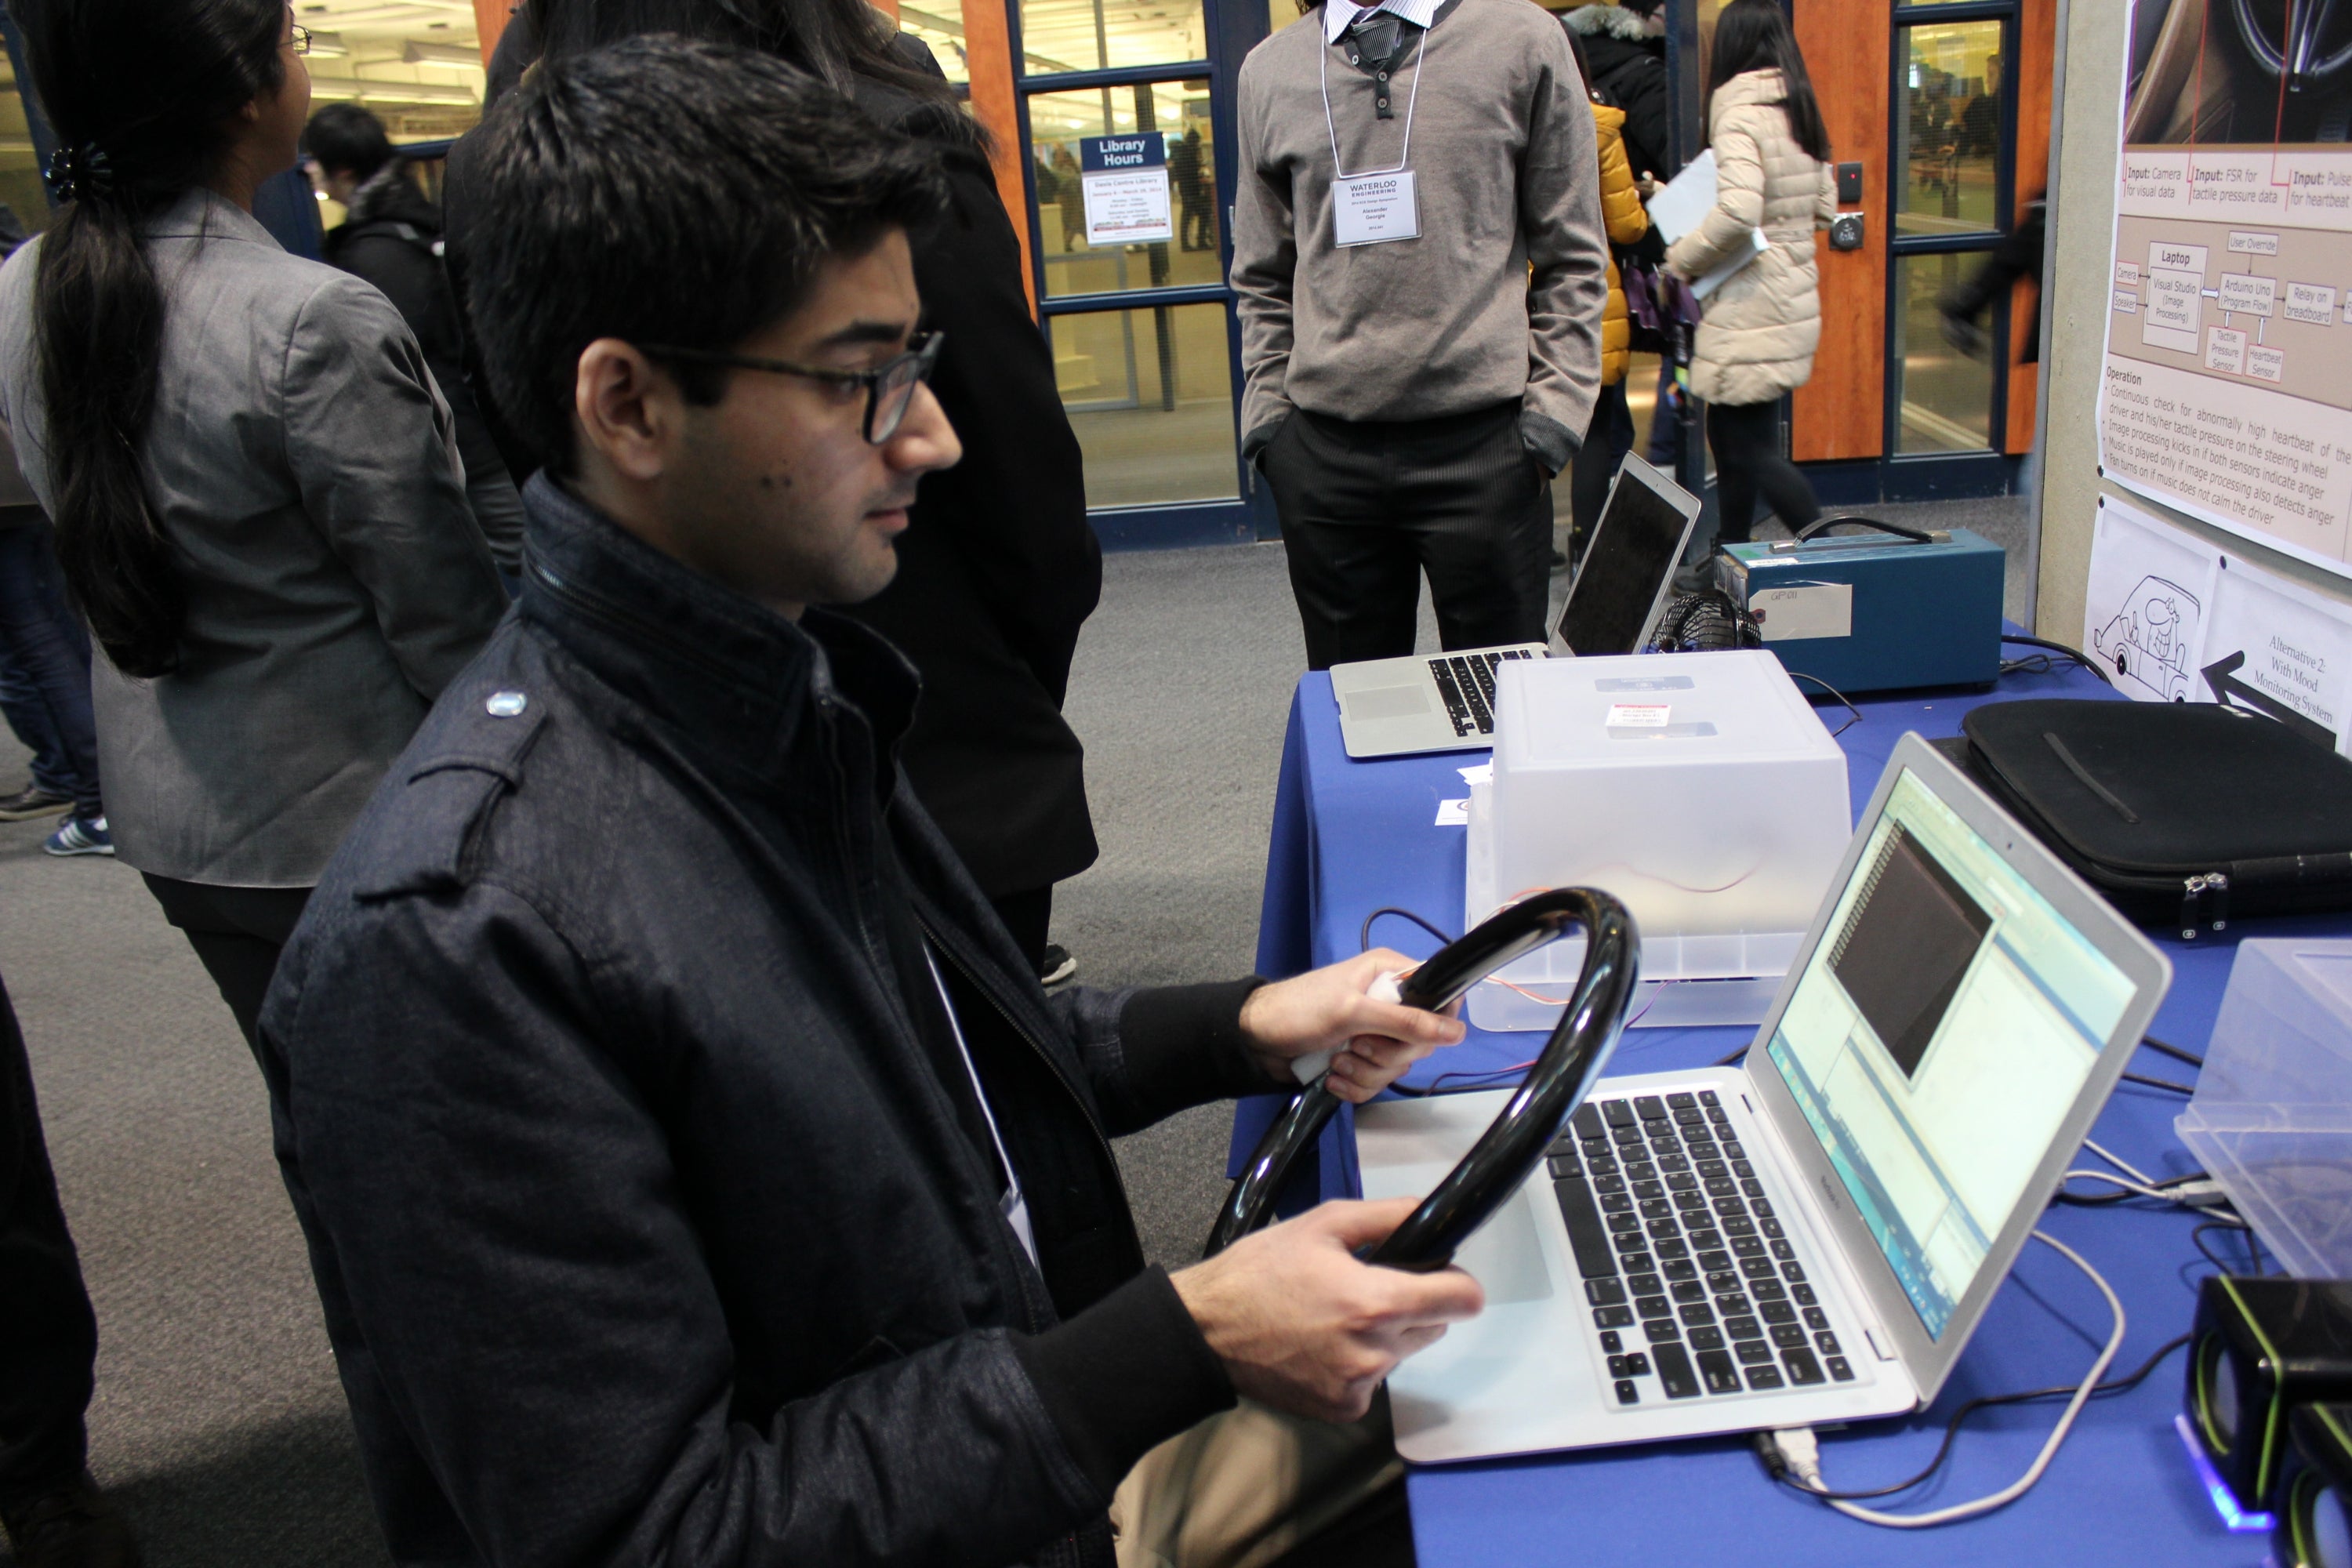 Student trying out Mood Monitoring system